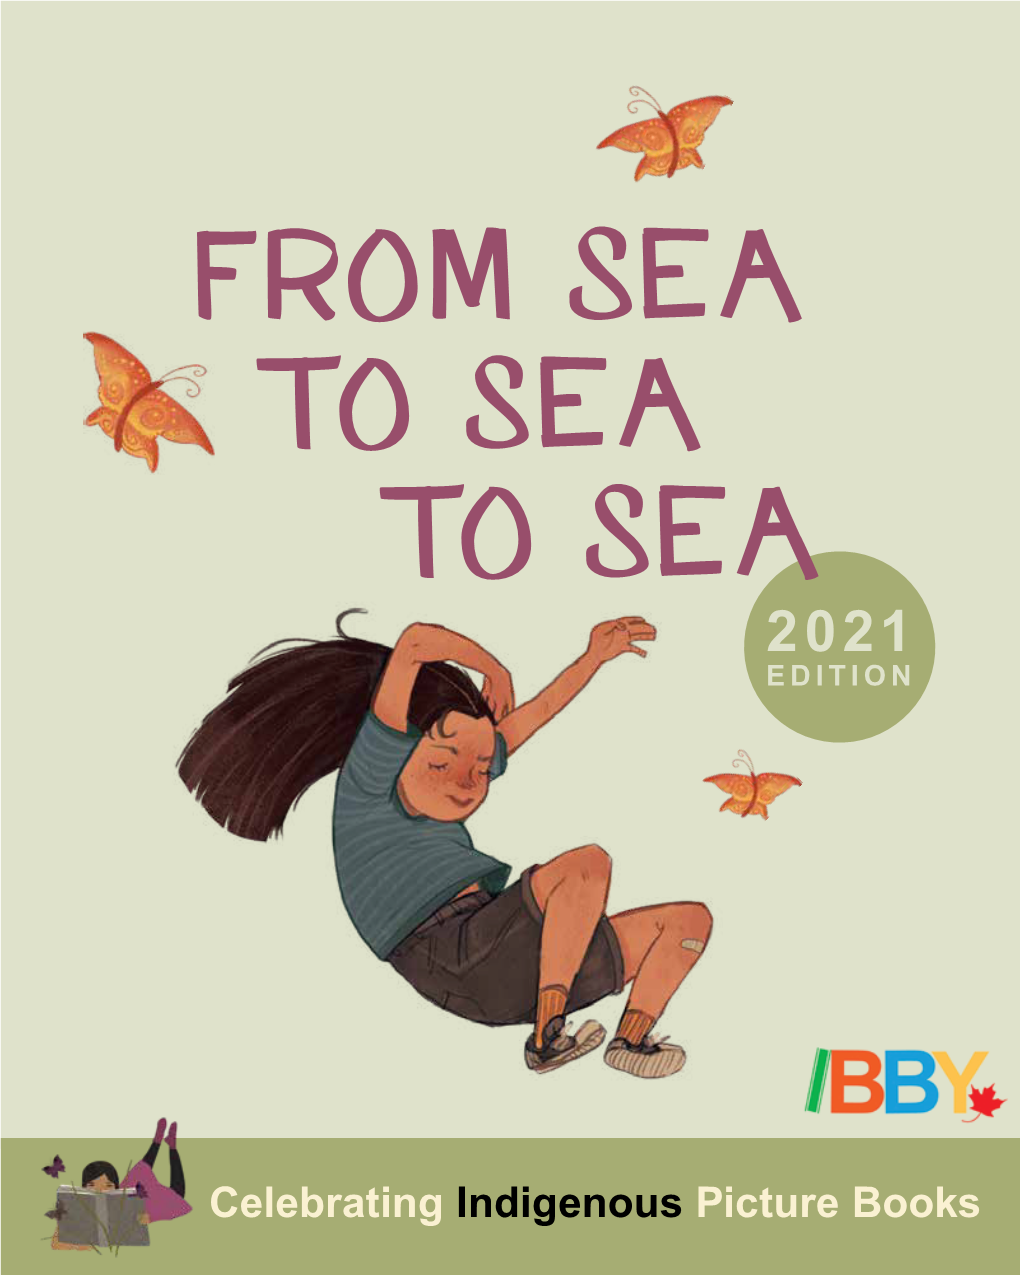 From Sea to Sea to Sea 2021 Edition